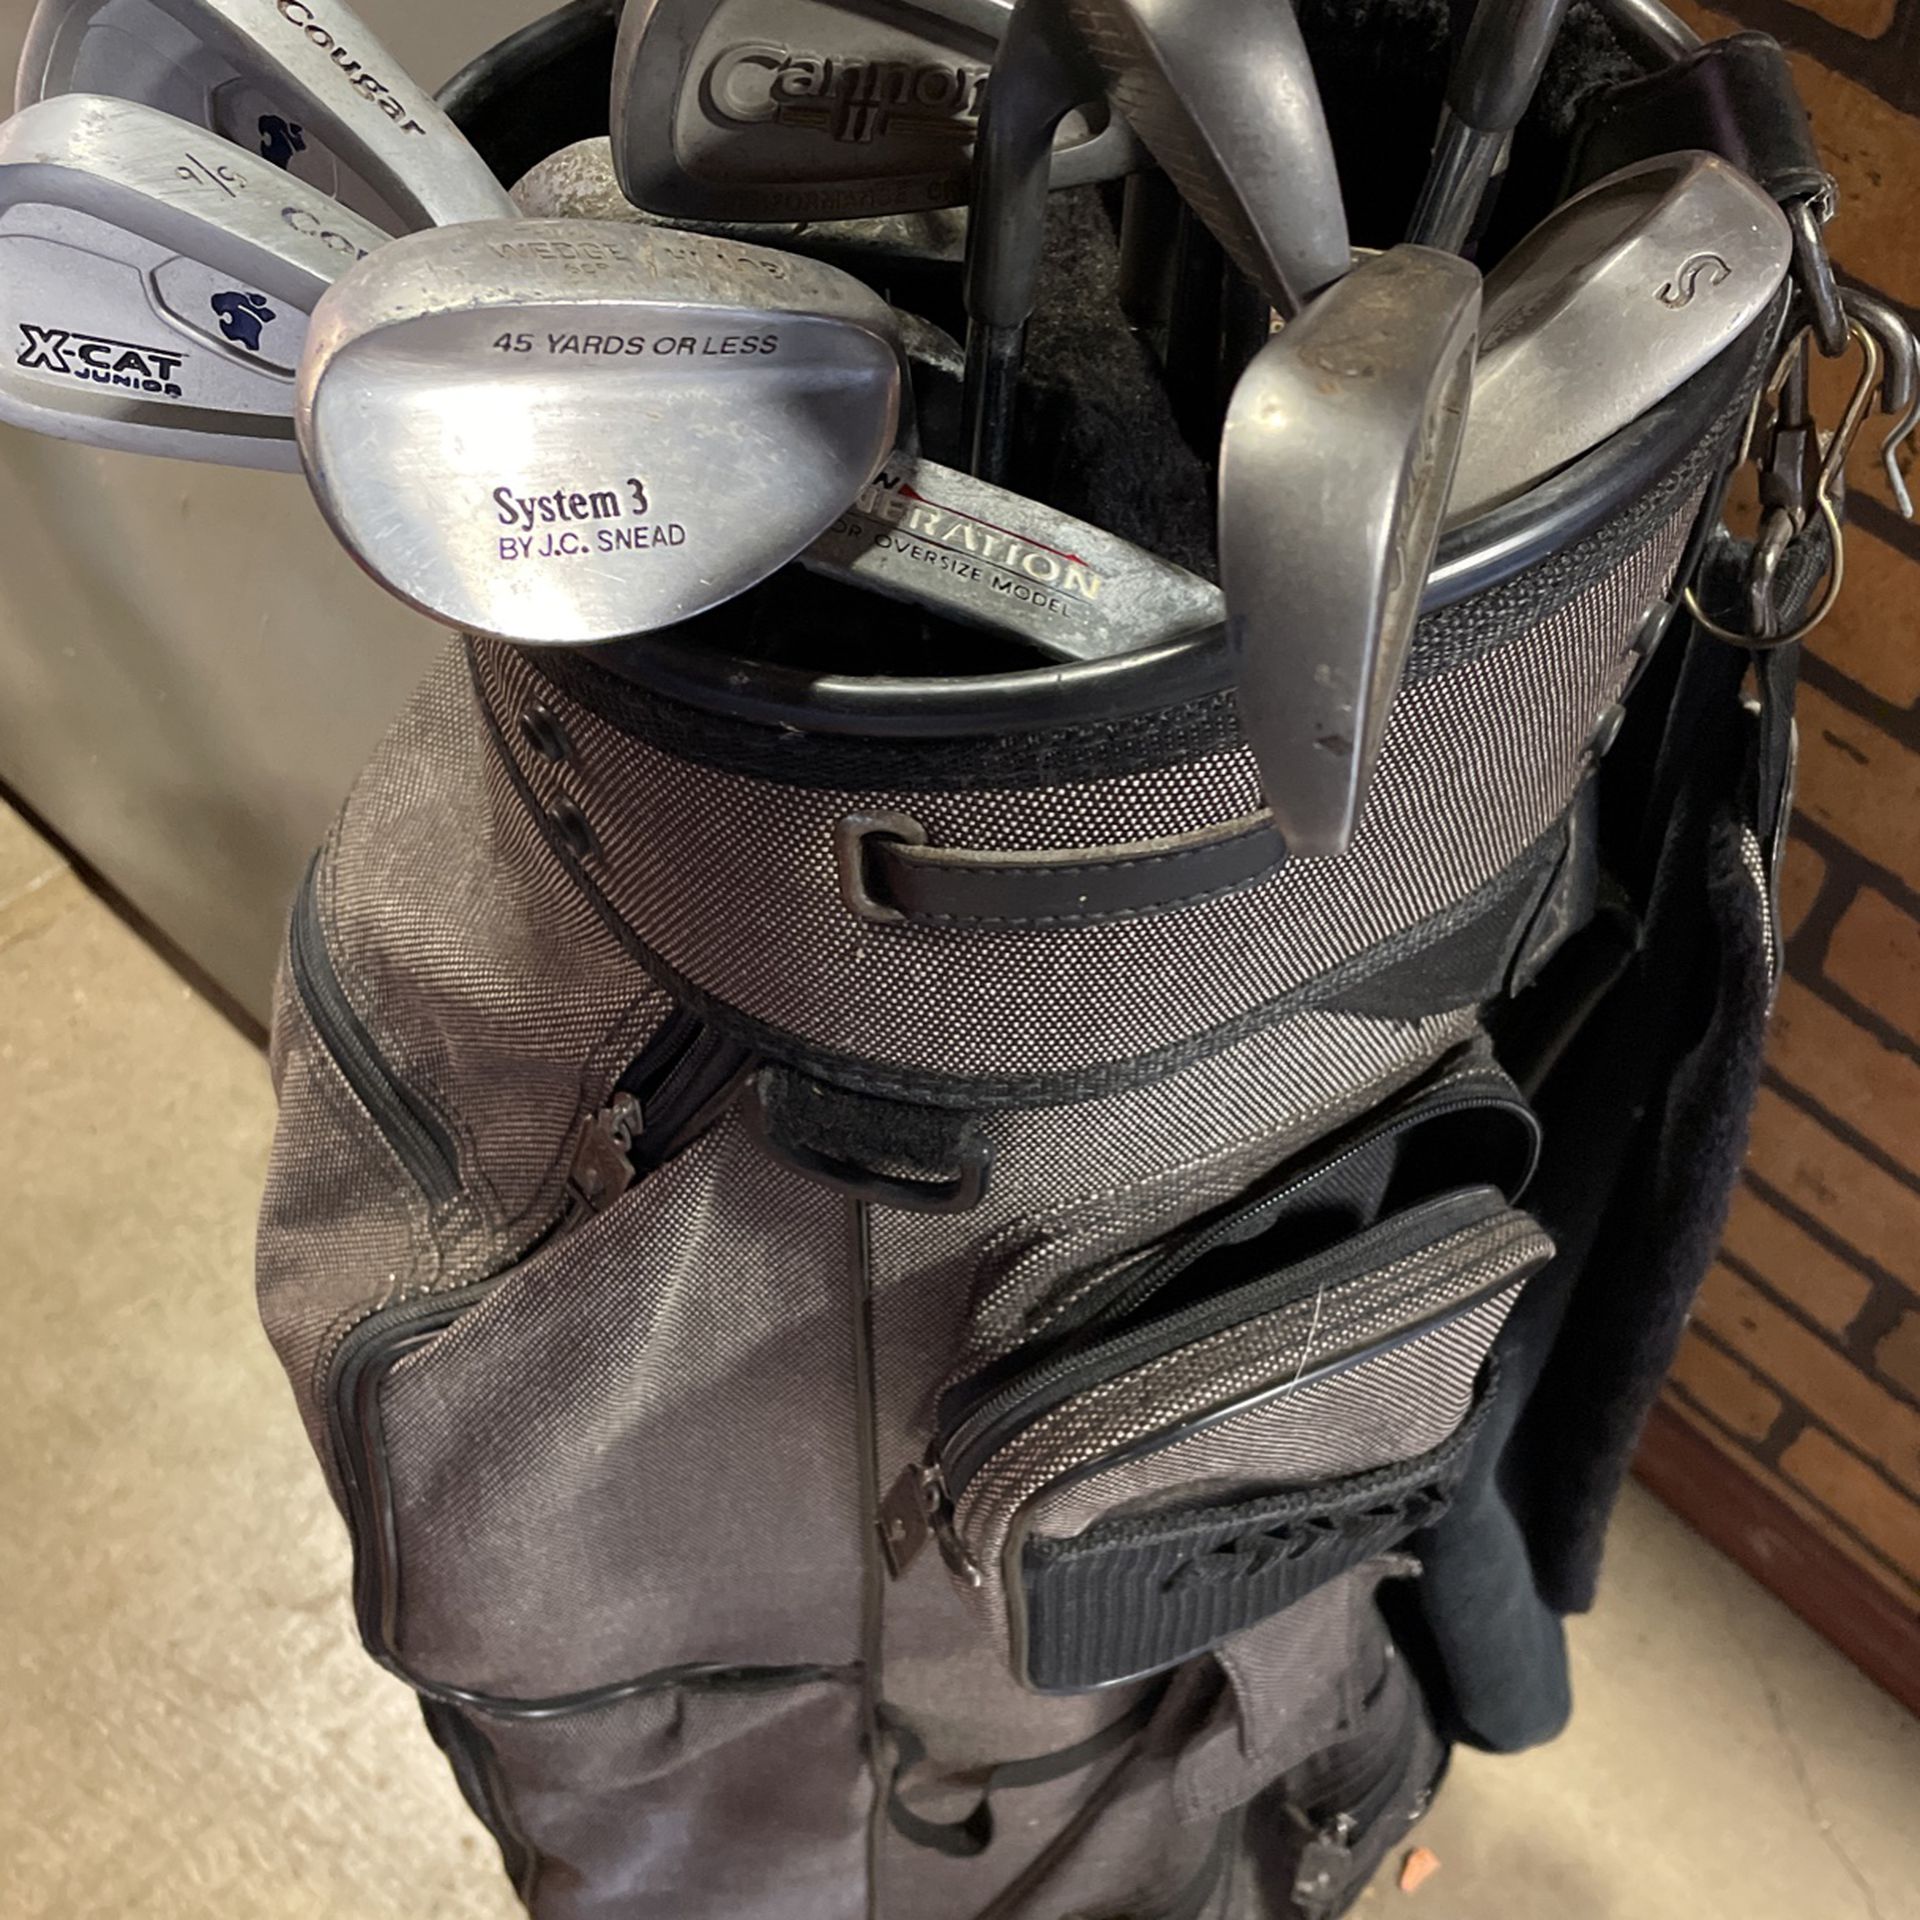 Knight Golf Bag With Clubs Included